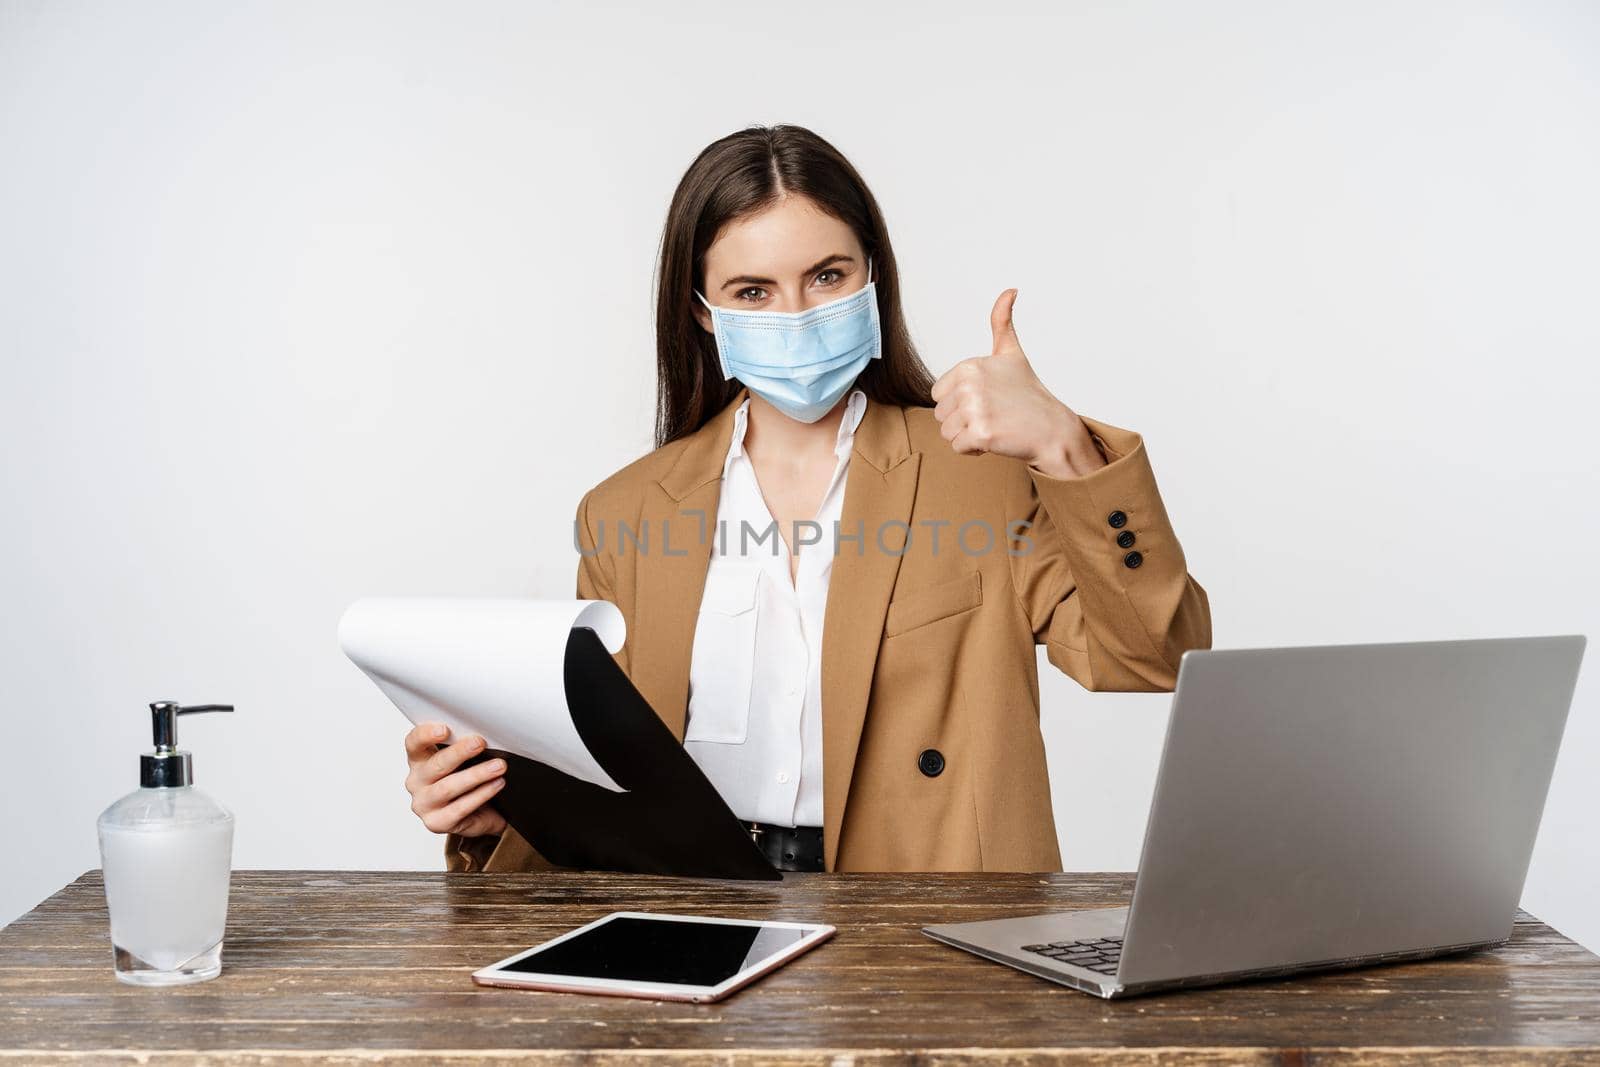 Woman working in office at table, holding clipboard with papers, showing thumbs up, wearing medical face mask, white background.